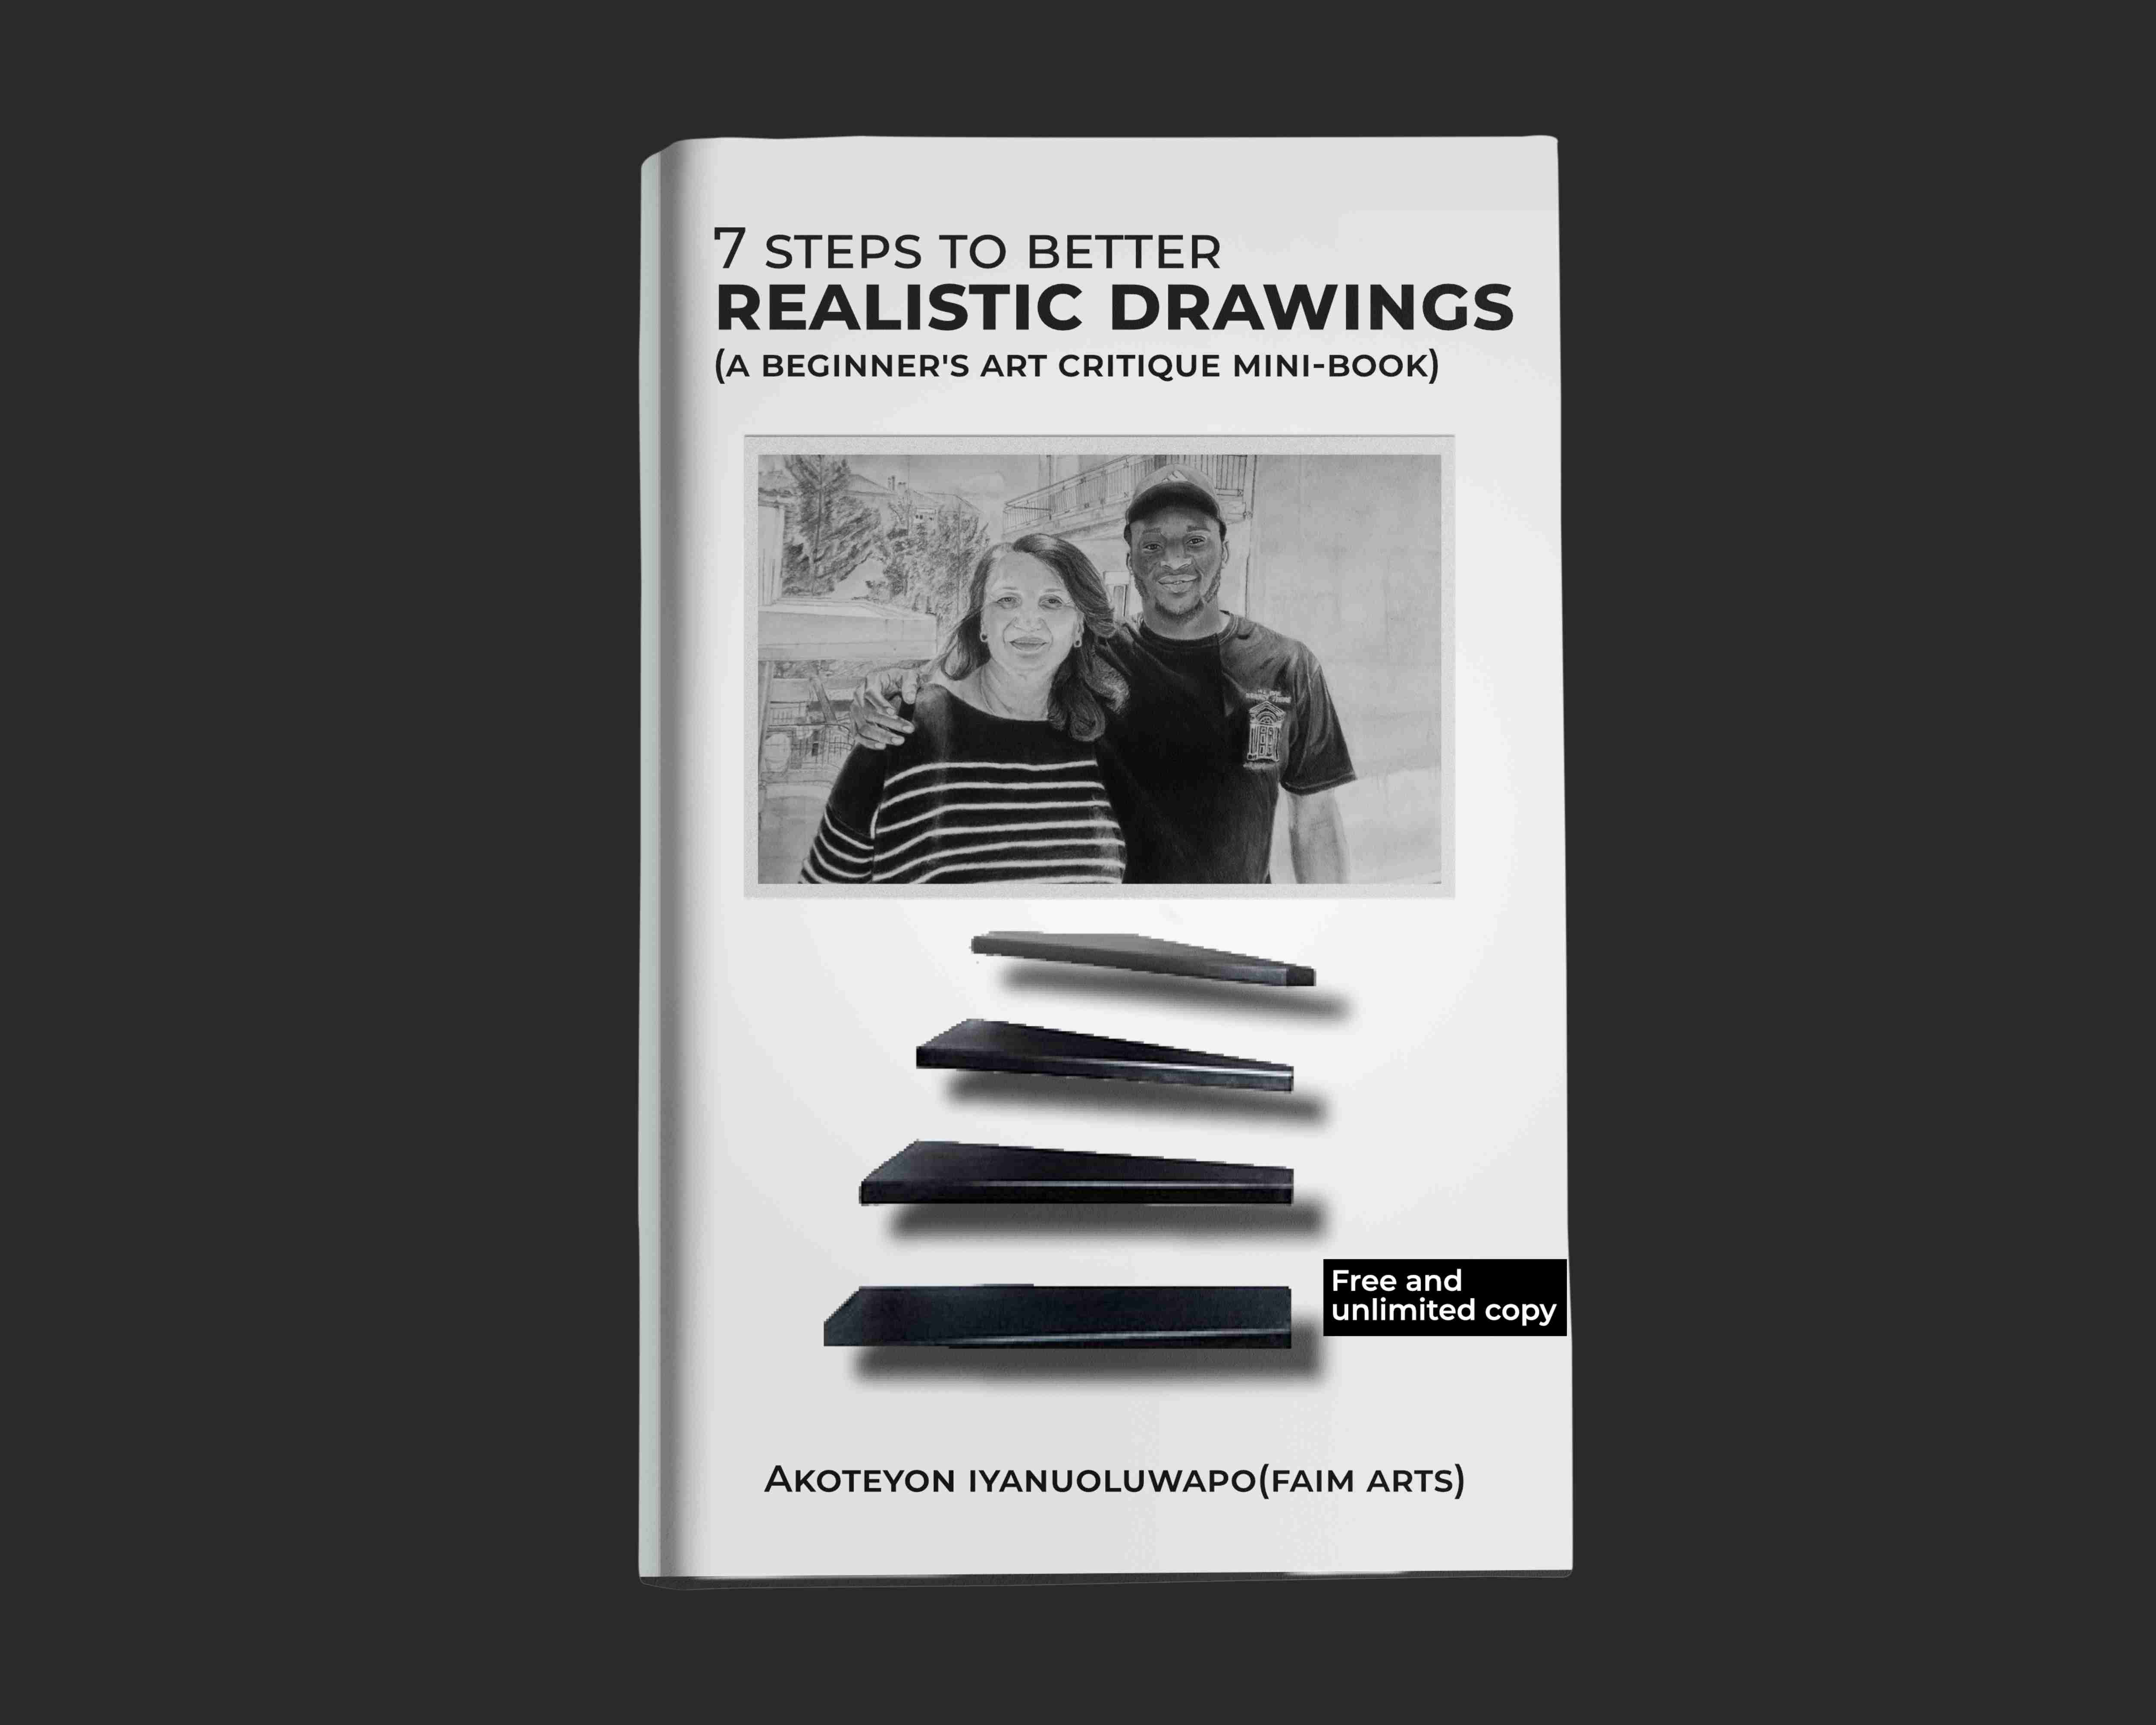 7 steps to better realistic drawings book cover